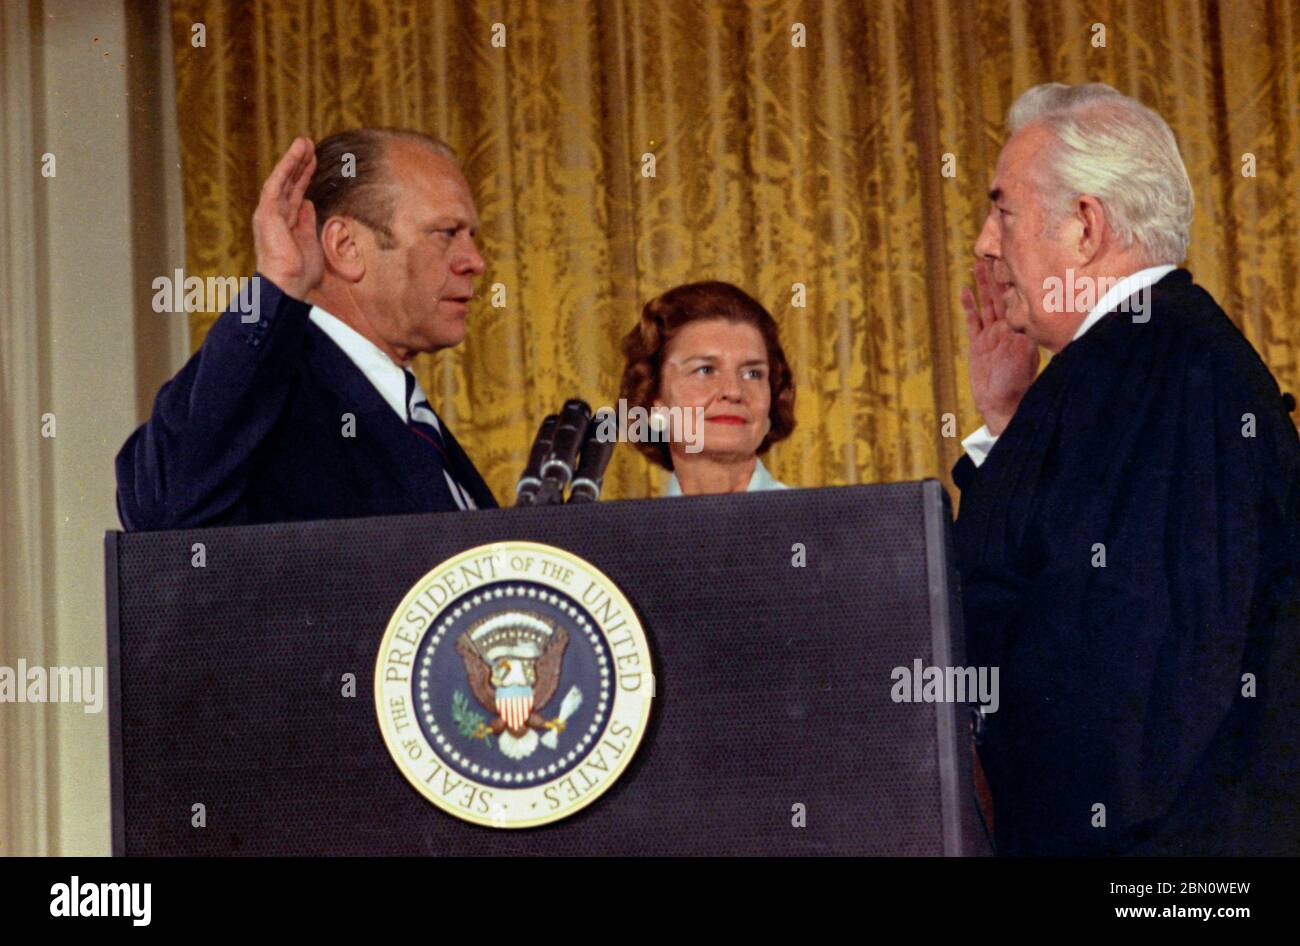 Chief Justice Warren Burger administering the Oath of Office to President Gerald Ford following the resignation of Richard Nixon, August 9, 1974 Stock Photo